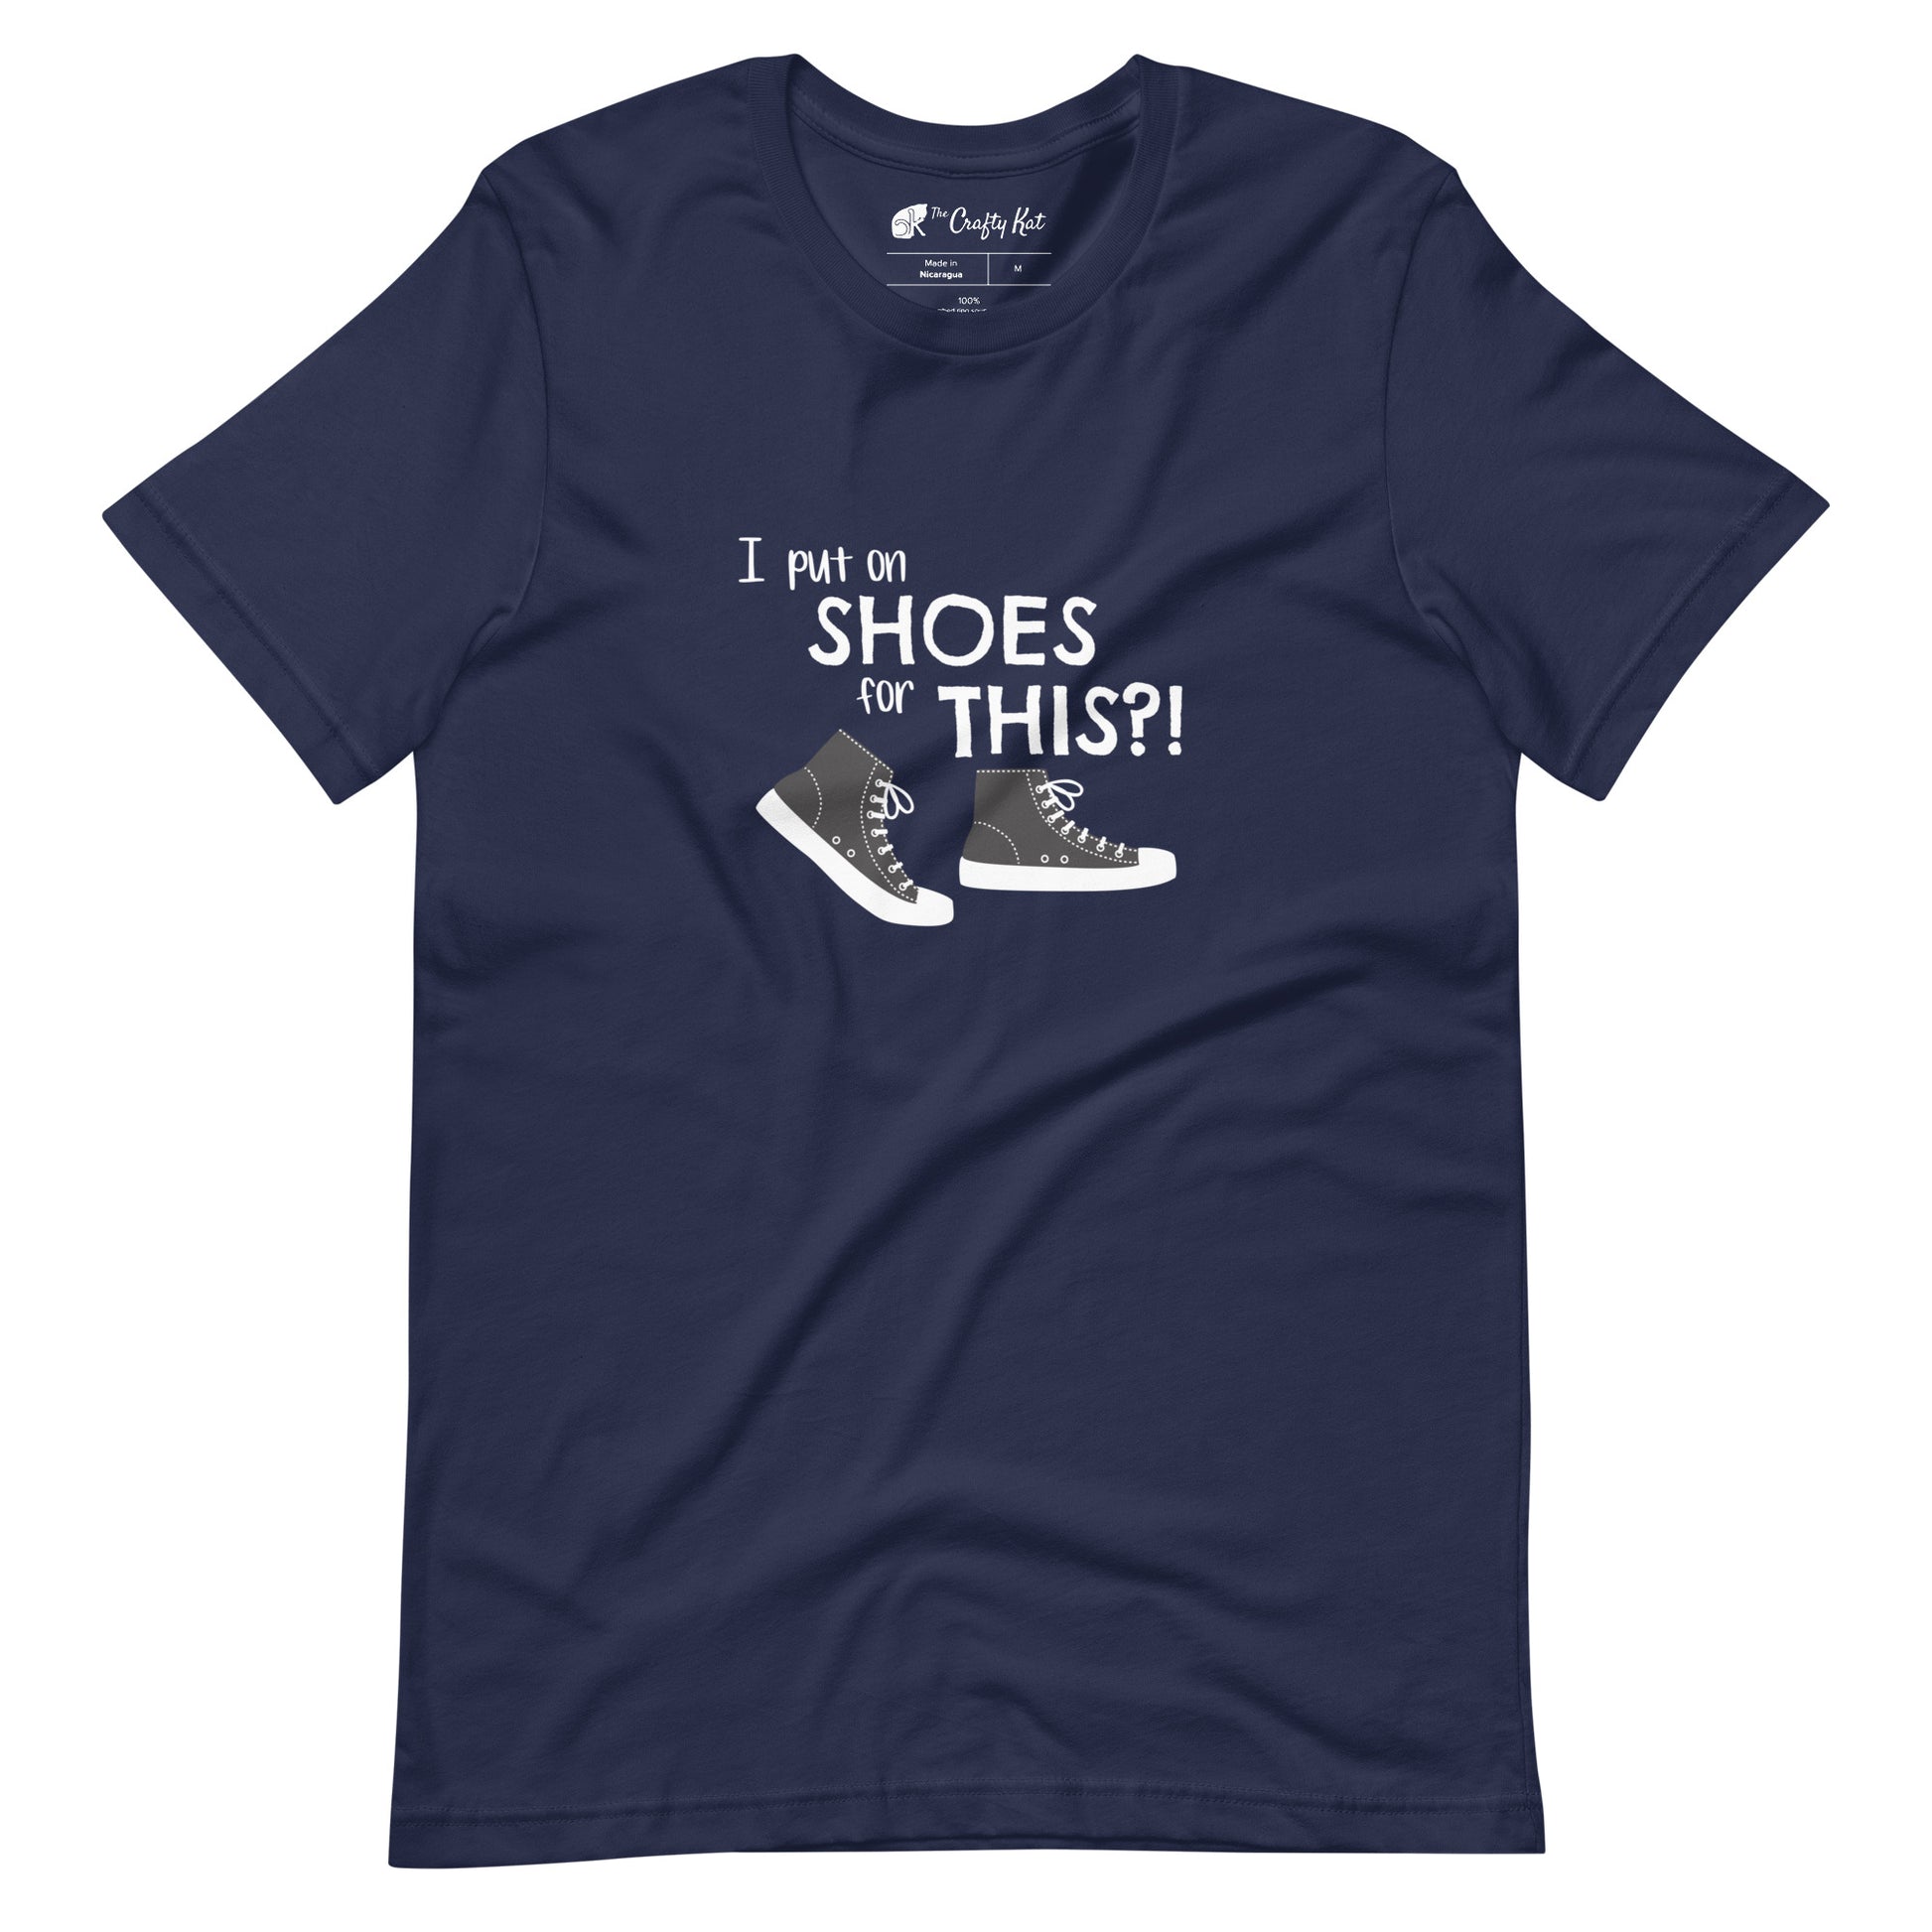 Navy t-shirt with graphic of black and white canvas "chuck" sneakers and text: "I put on SHOES for THIS?!"